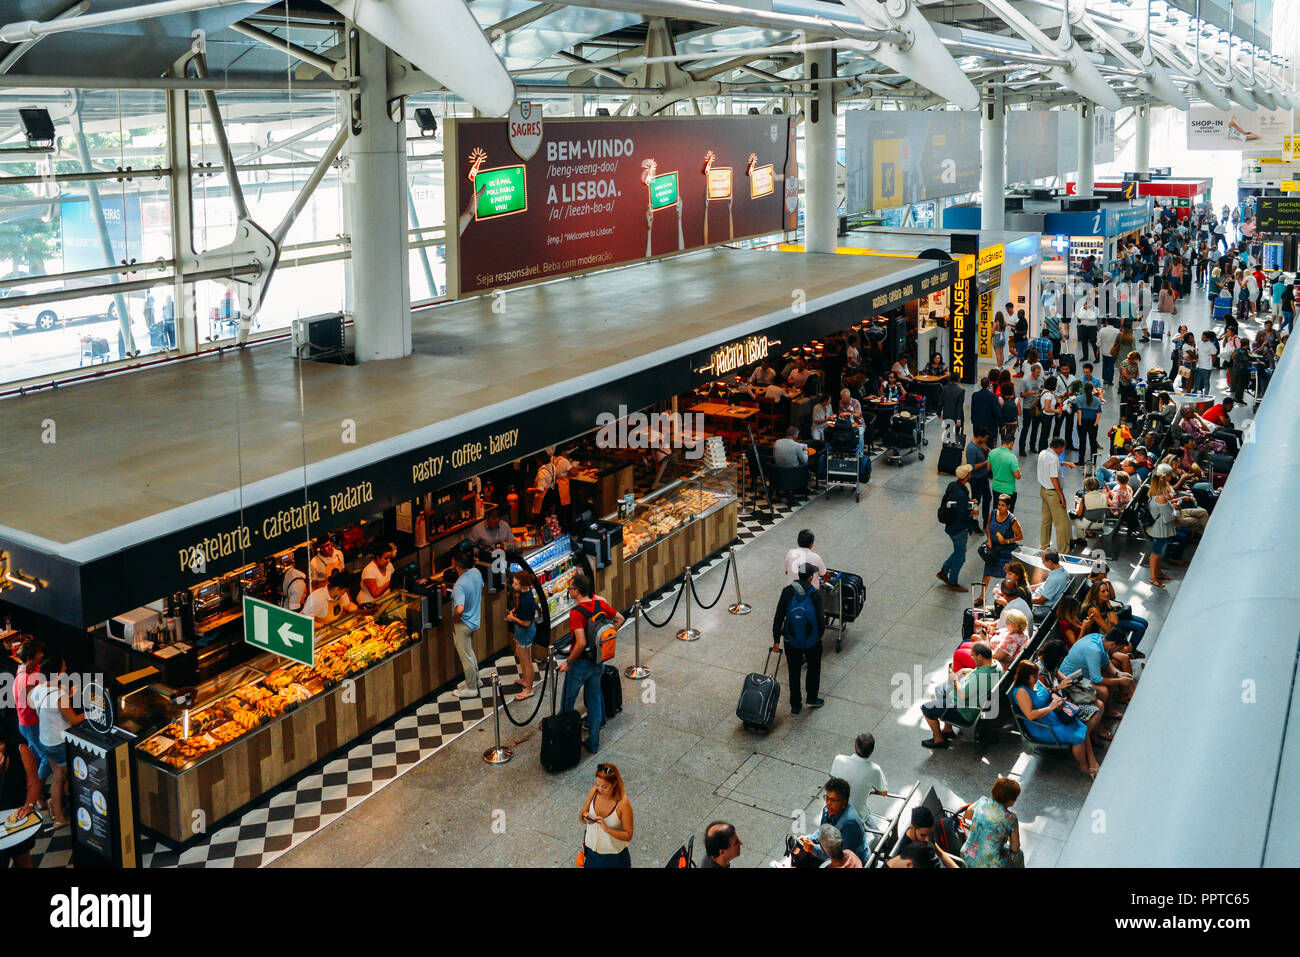 Lisbon, Portugal - Sept 26, 2018: Passsengers at departure Hall of Lisbon international airport, the largest in the country Stock Photo